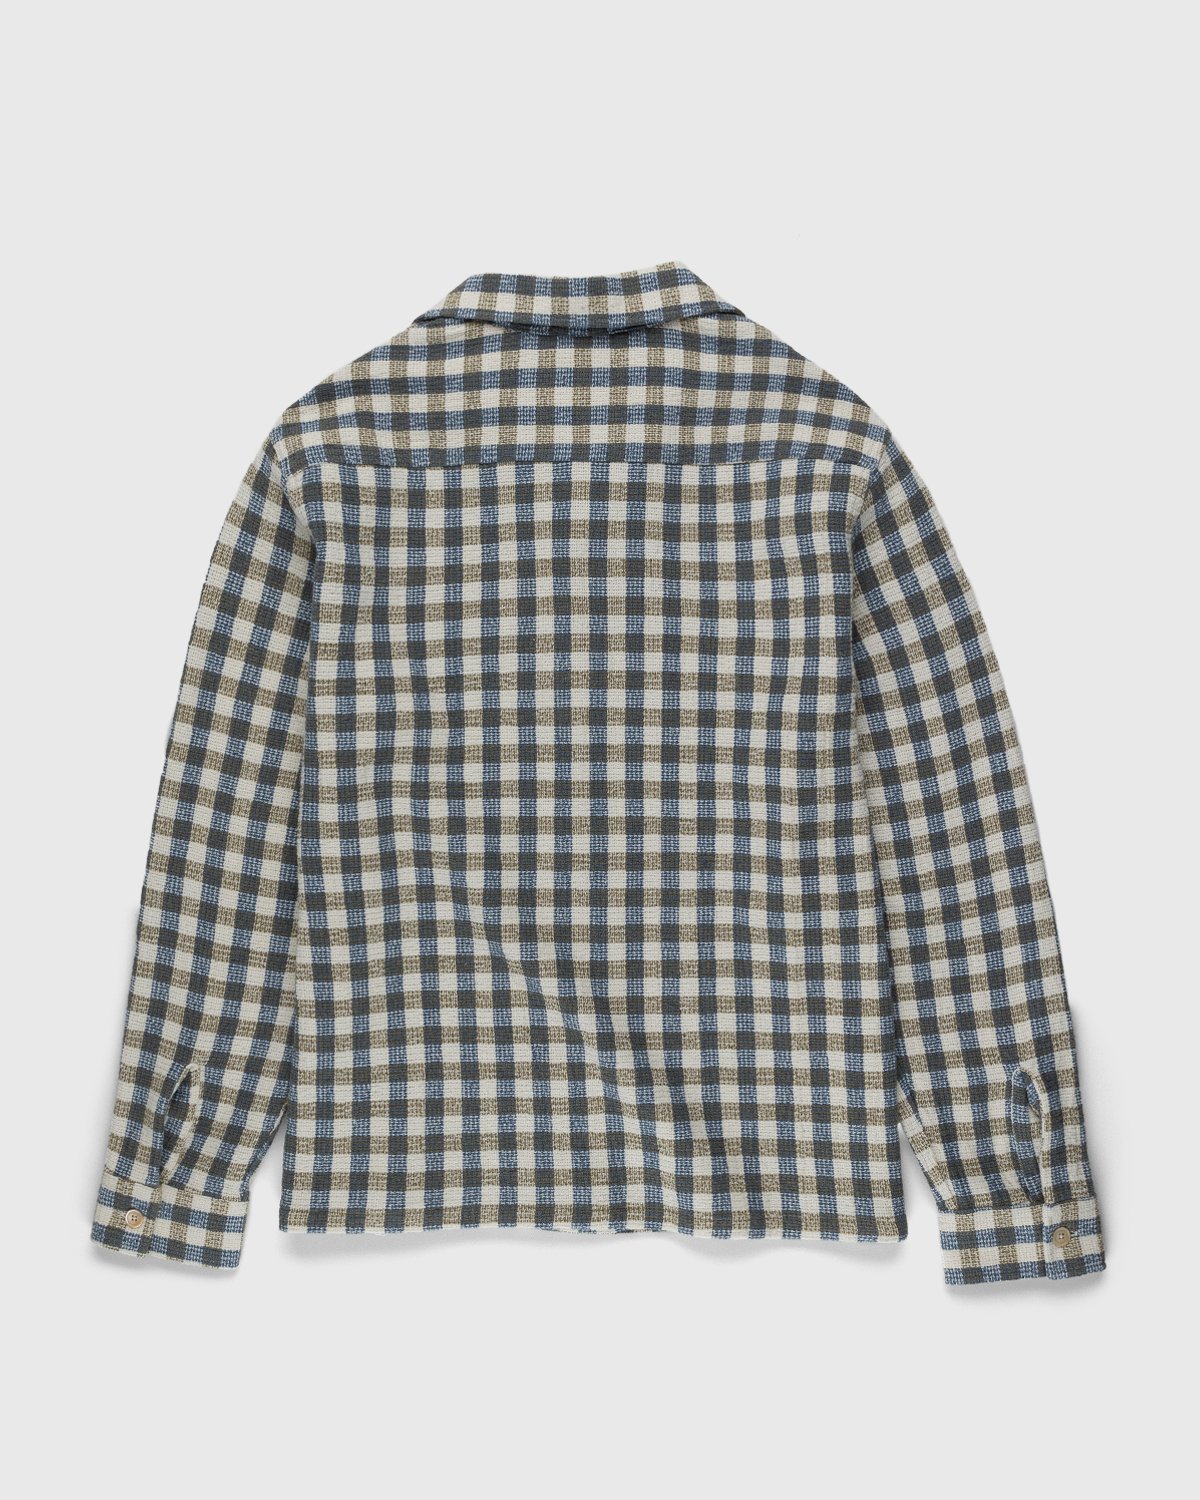 Our Legacy - Heusen Shirt Light Blue/Olive Summer Check - Clothing - Blue - Image 2